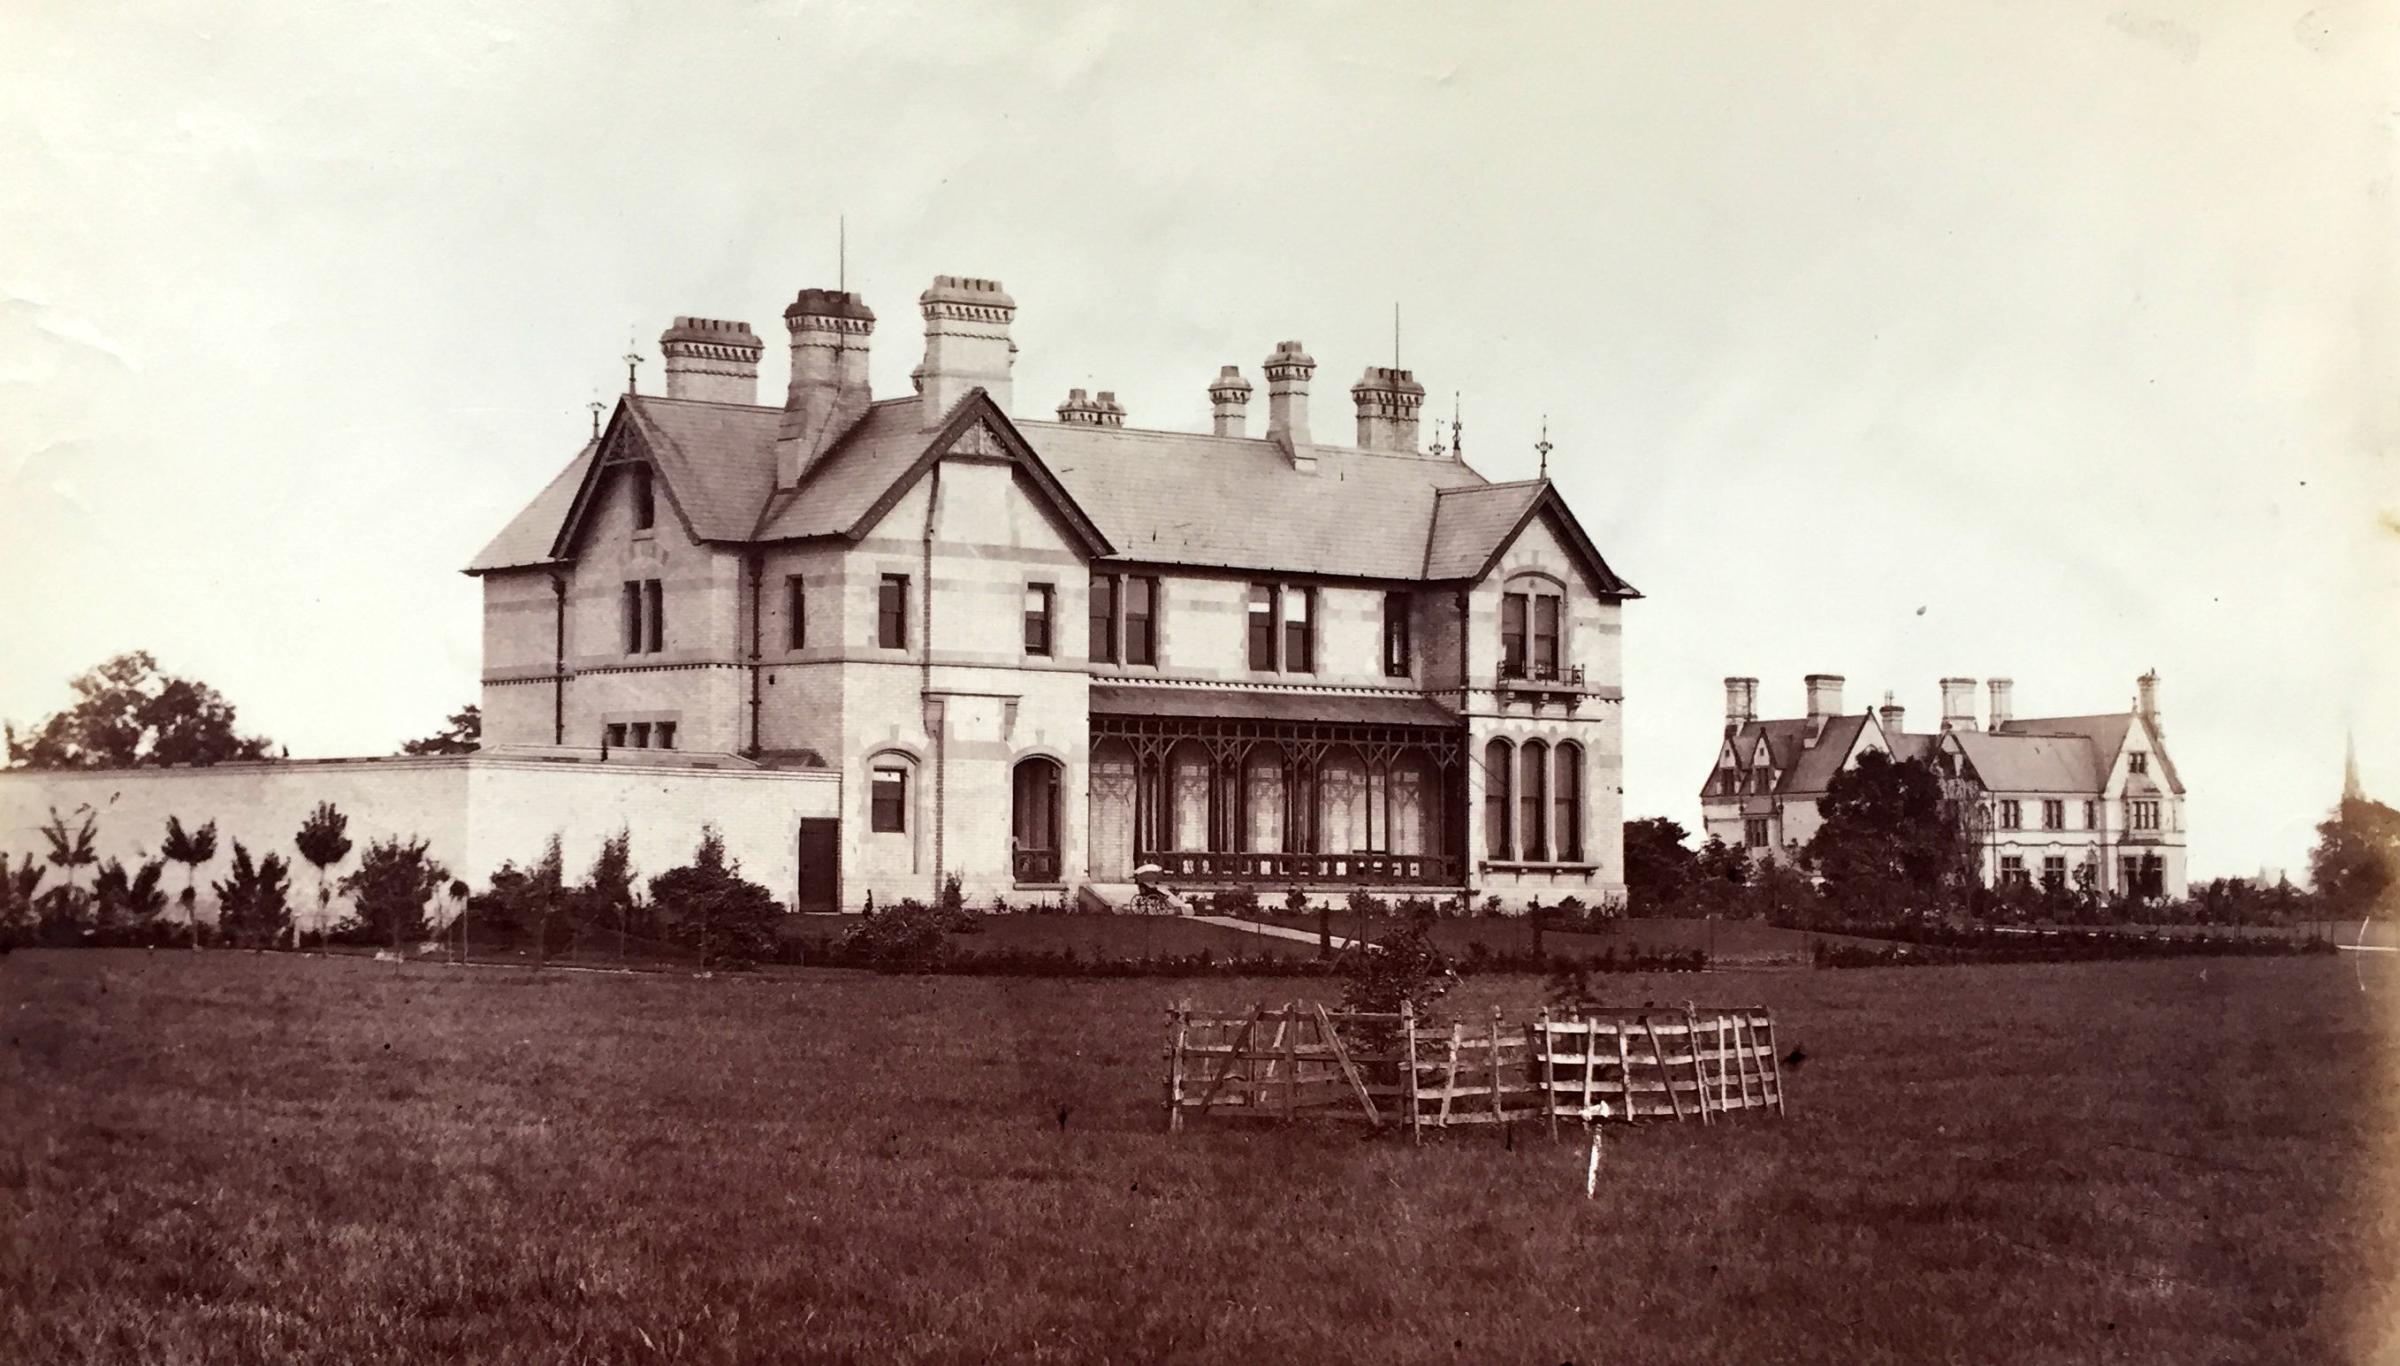 The Hummersknott and Upland mansions were built for Arthur Pease and his sister, Rachel, by their father, Joseph Pease, in the early 1860s. The estate was the setting for the 1895 Royal show